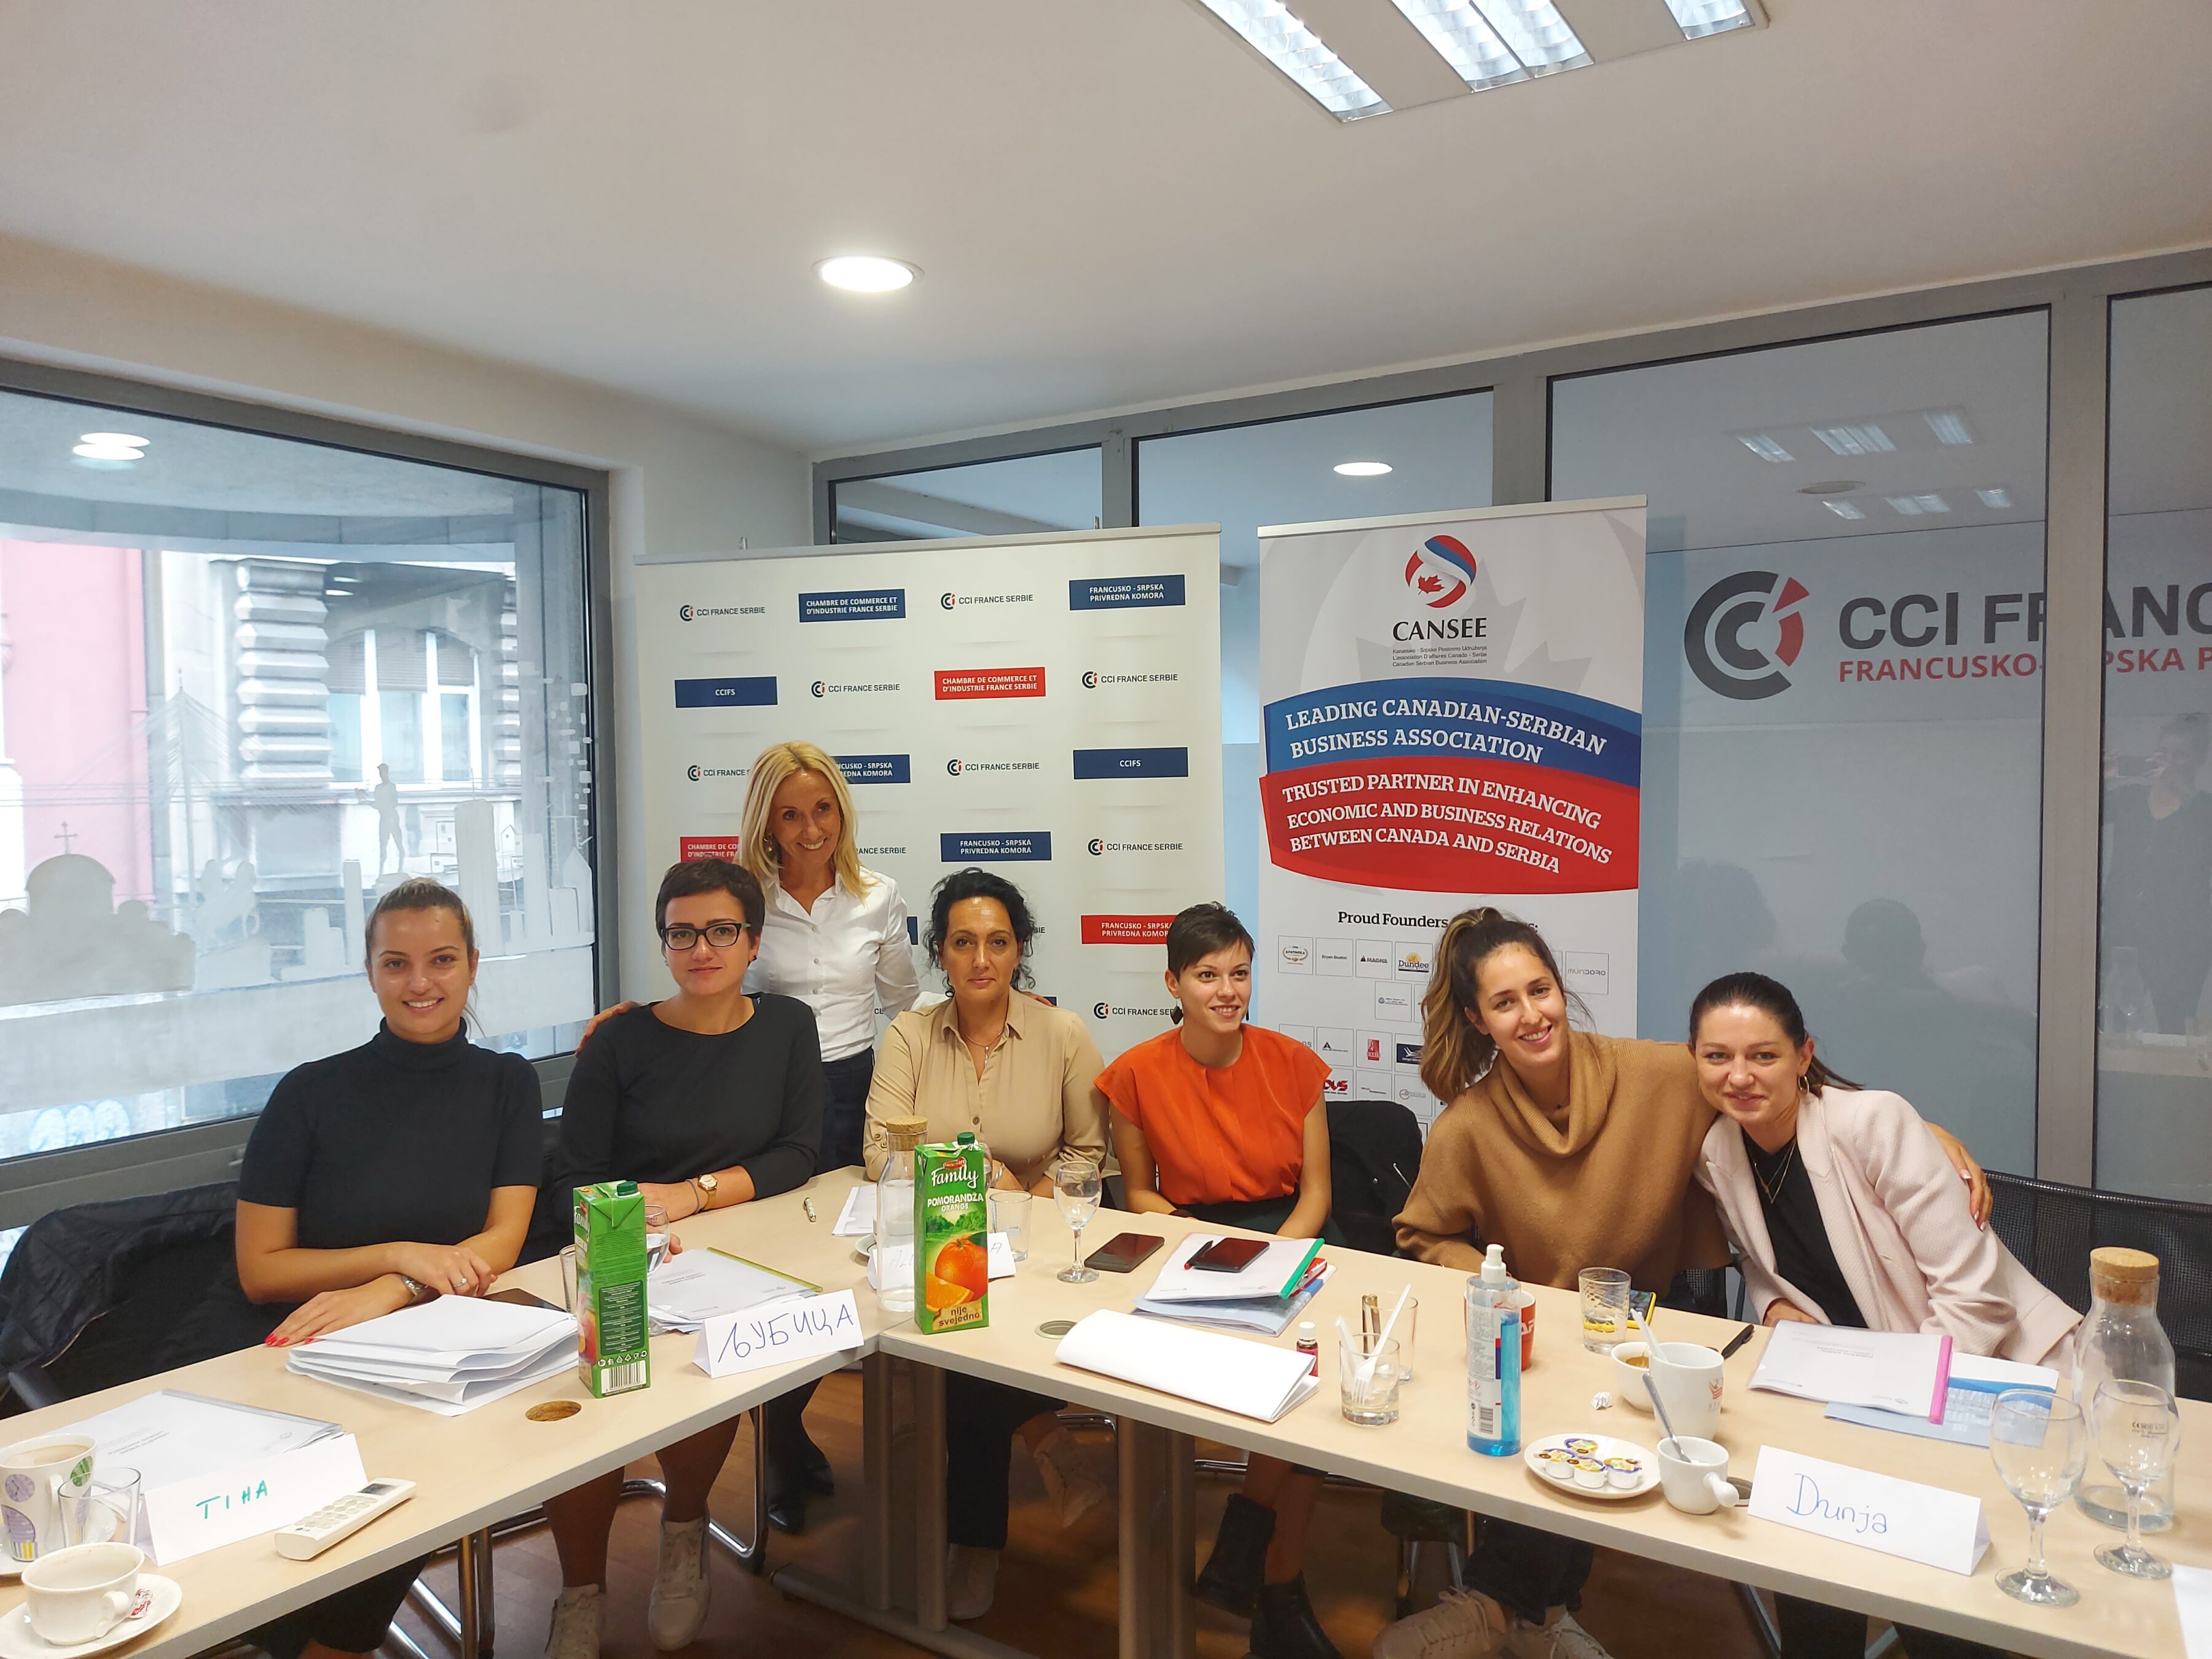 CANSEE and CCI France Serbie successfully co-organized “Empowering your Executive/Business Assistant” training